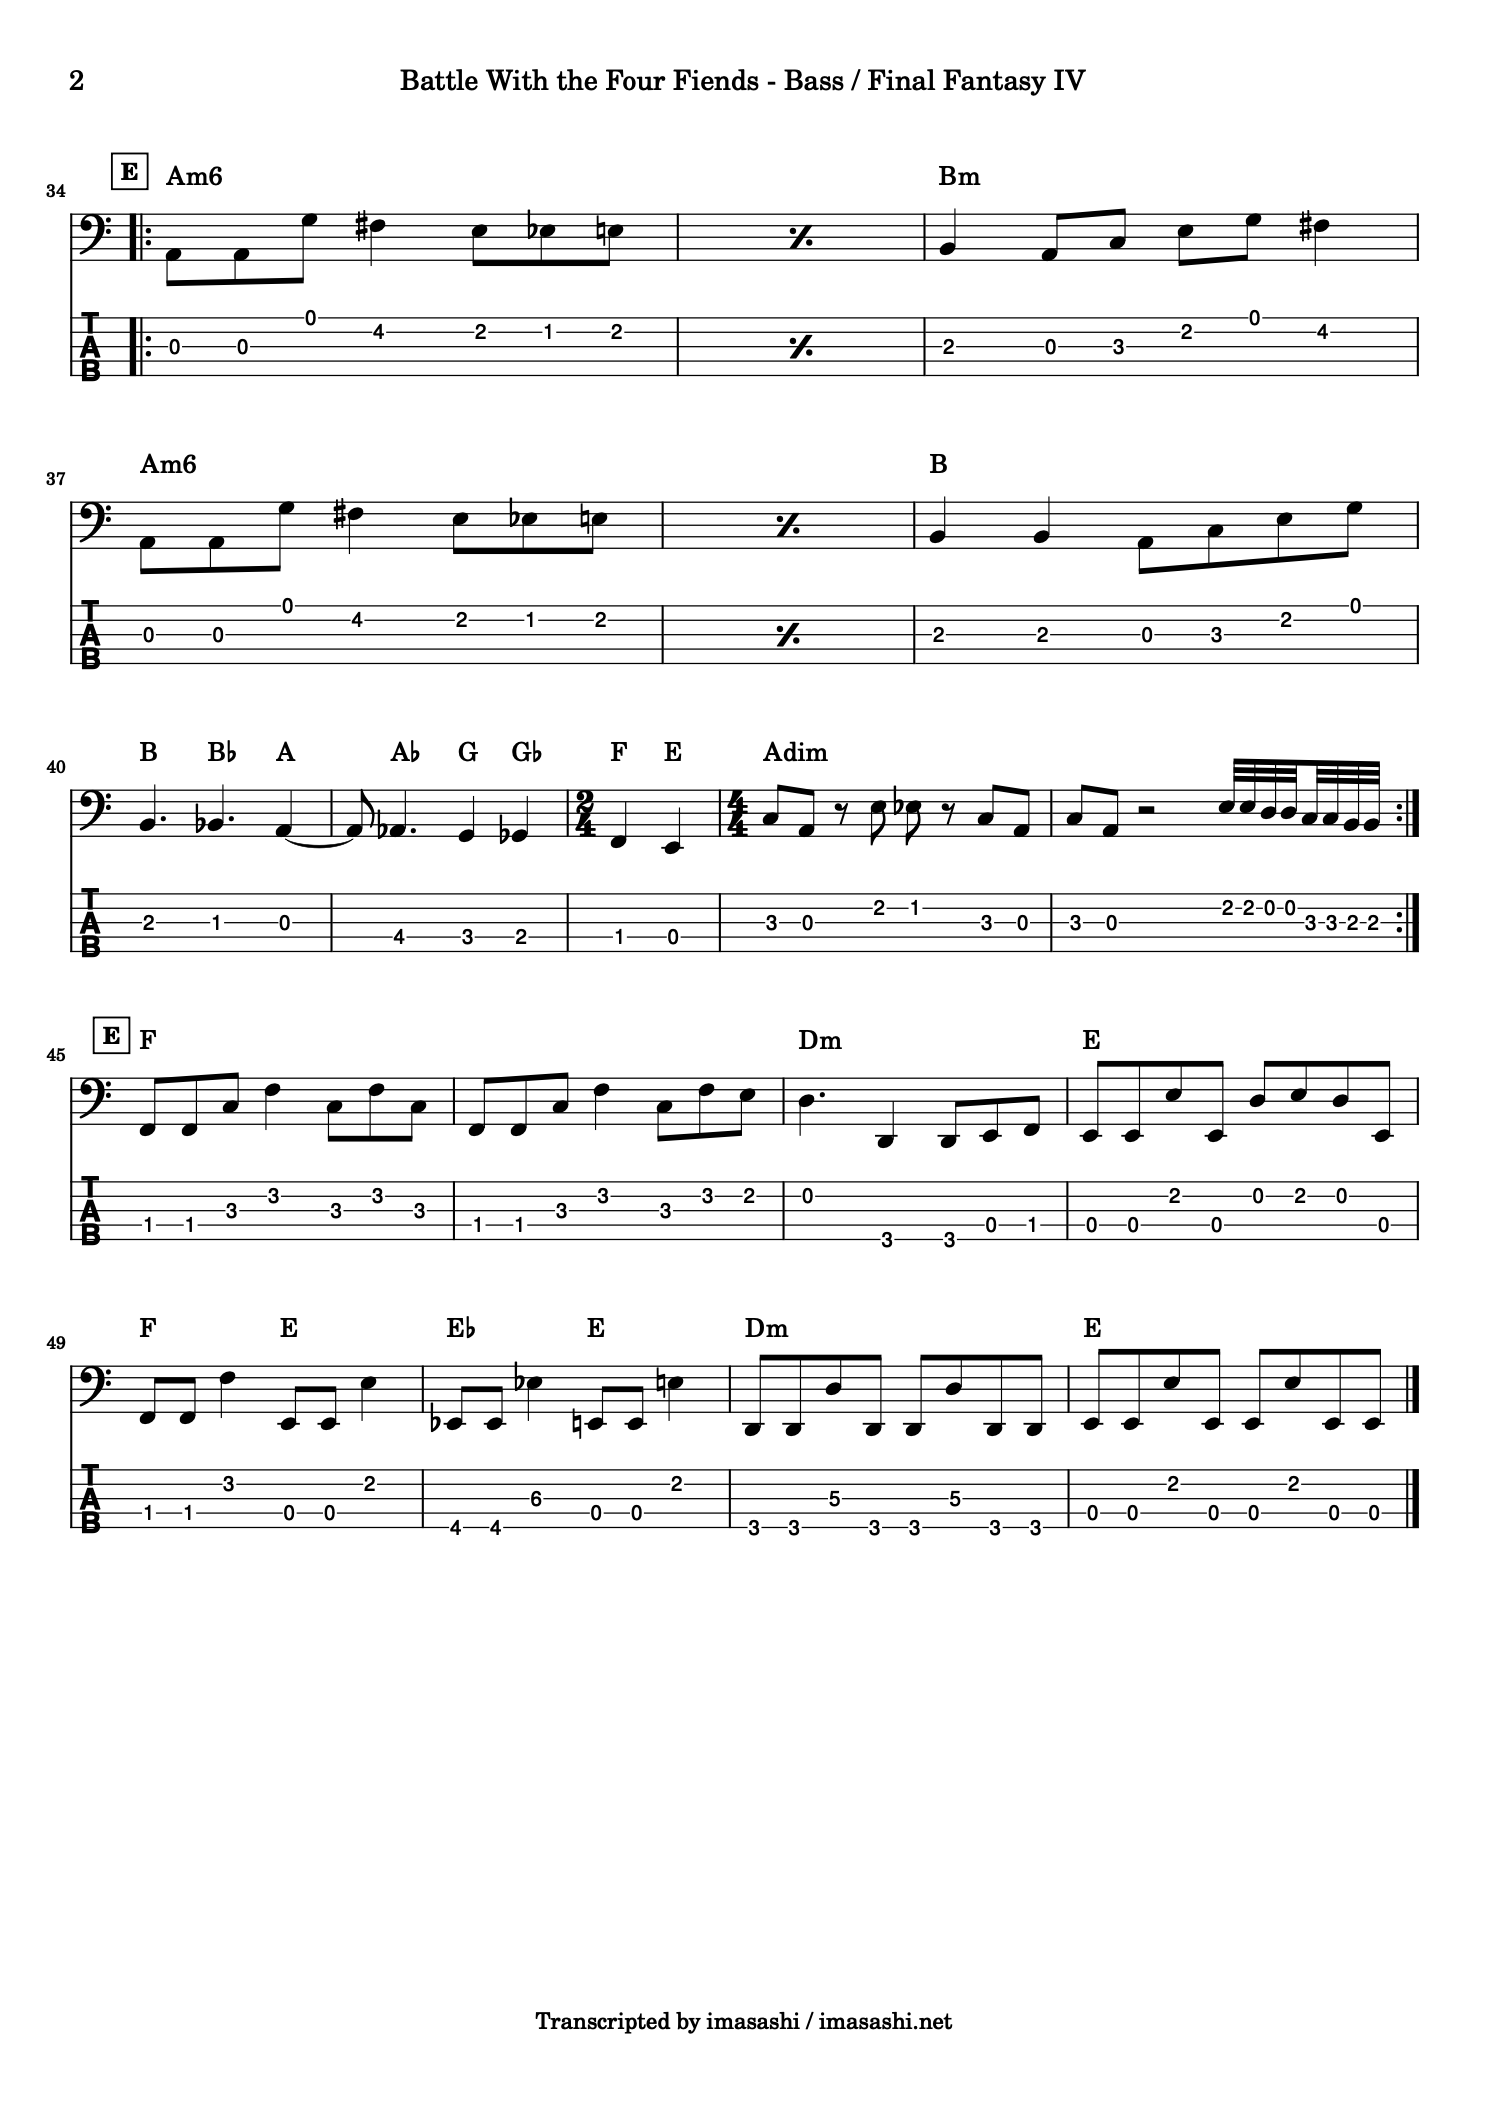 Final Fantasy 4 - Battle With the Four Fiends - Chords and Bass Tab - page 2